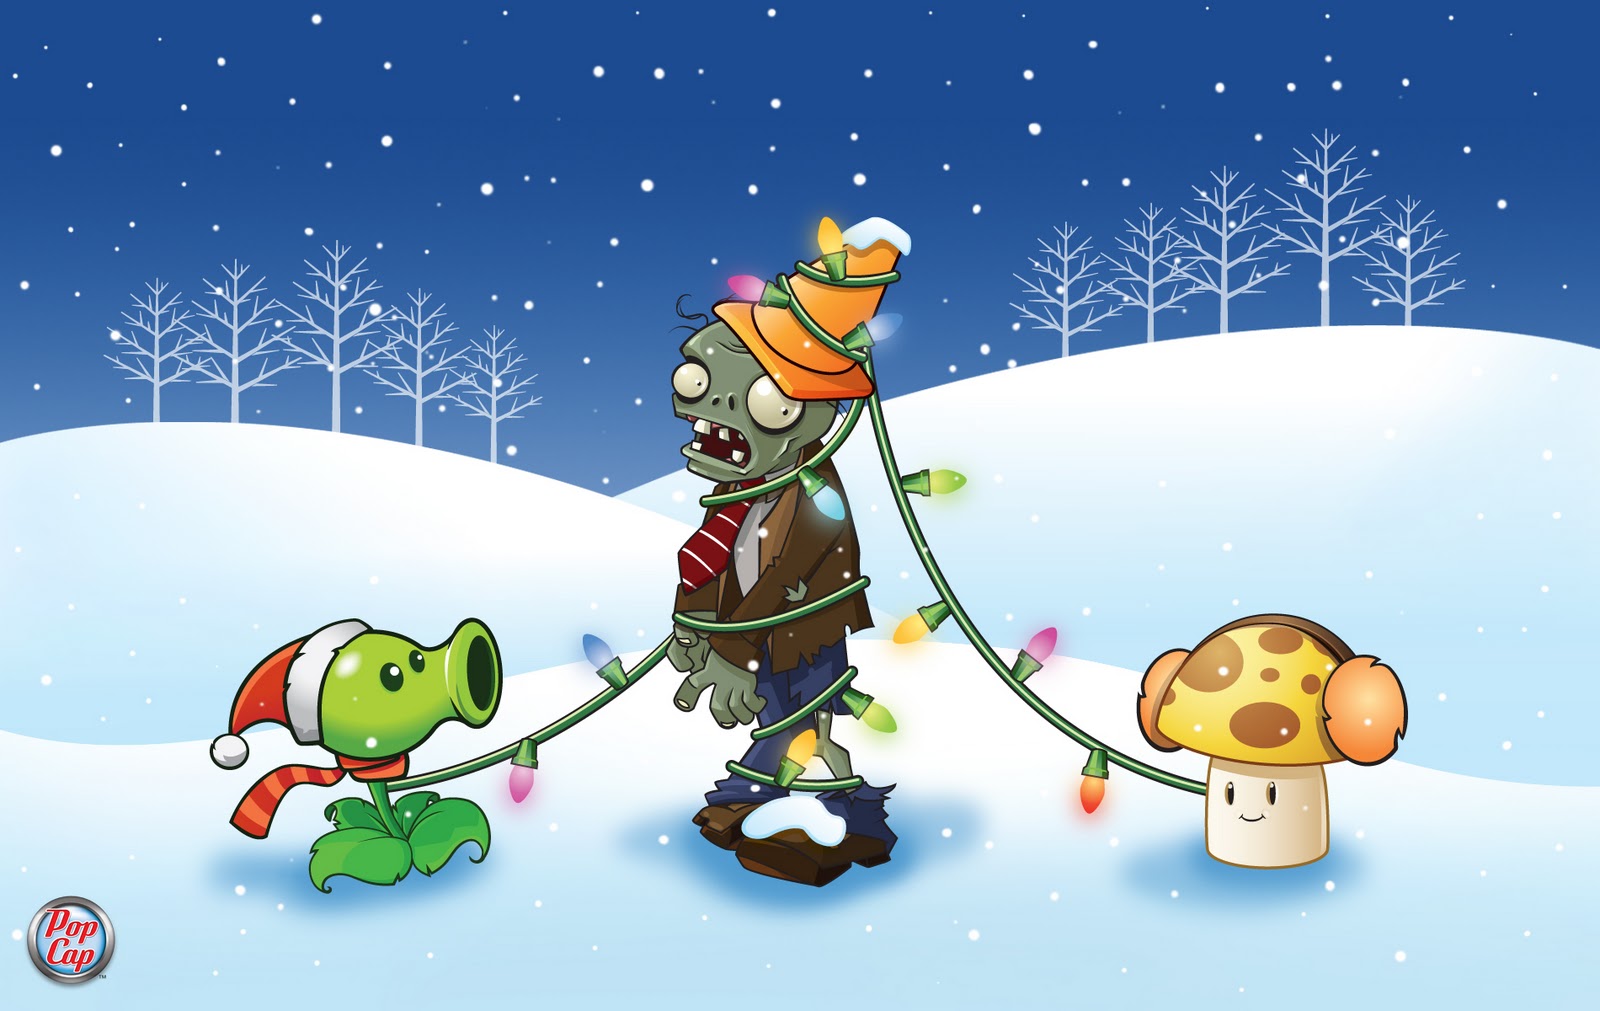 Gallery For Gt Plants Vs Zombies Christmas Wallpaper